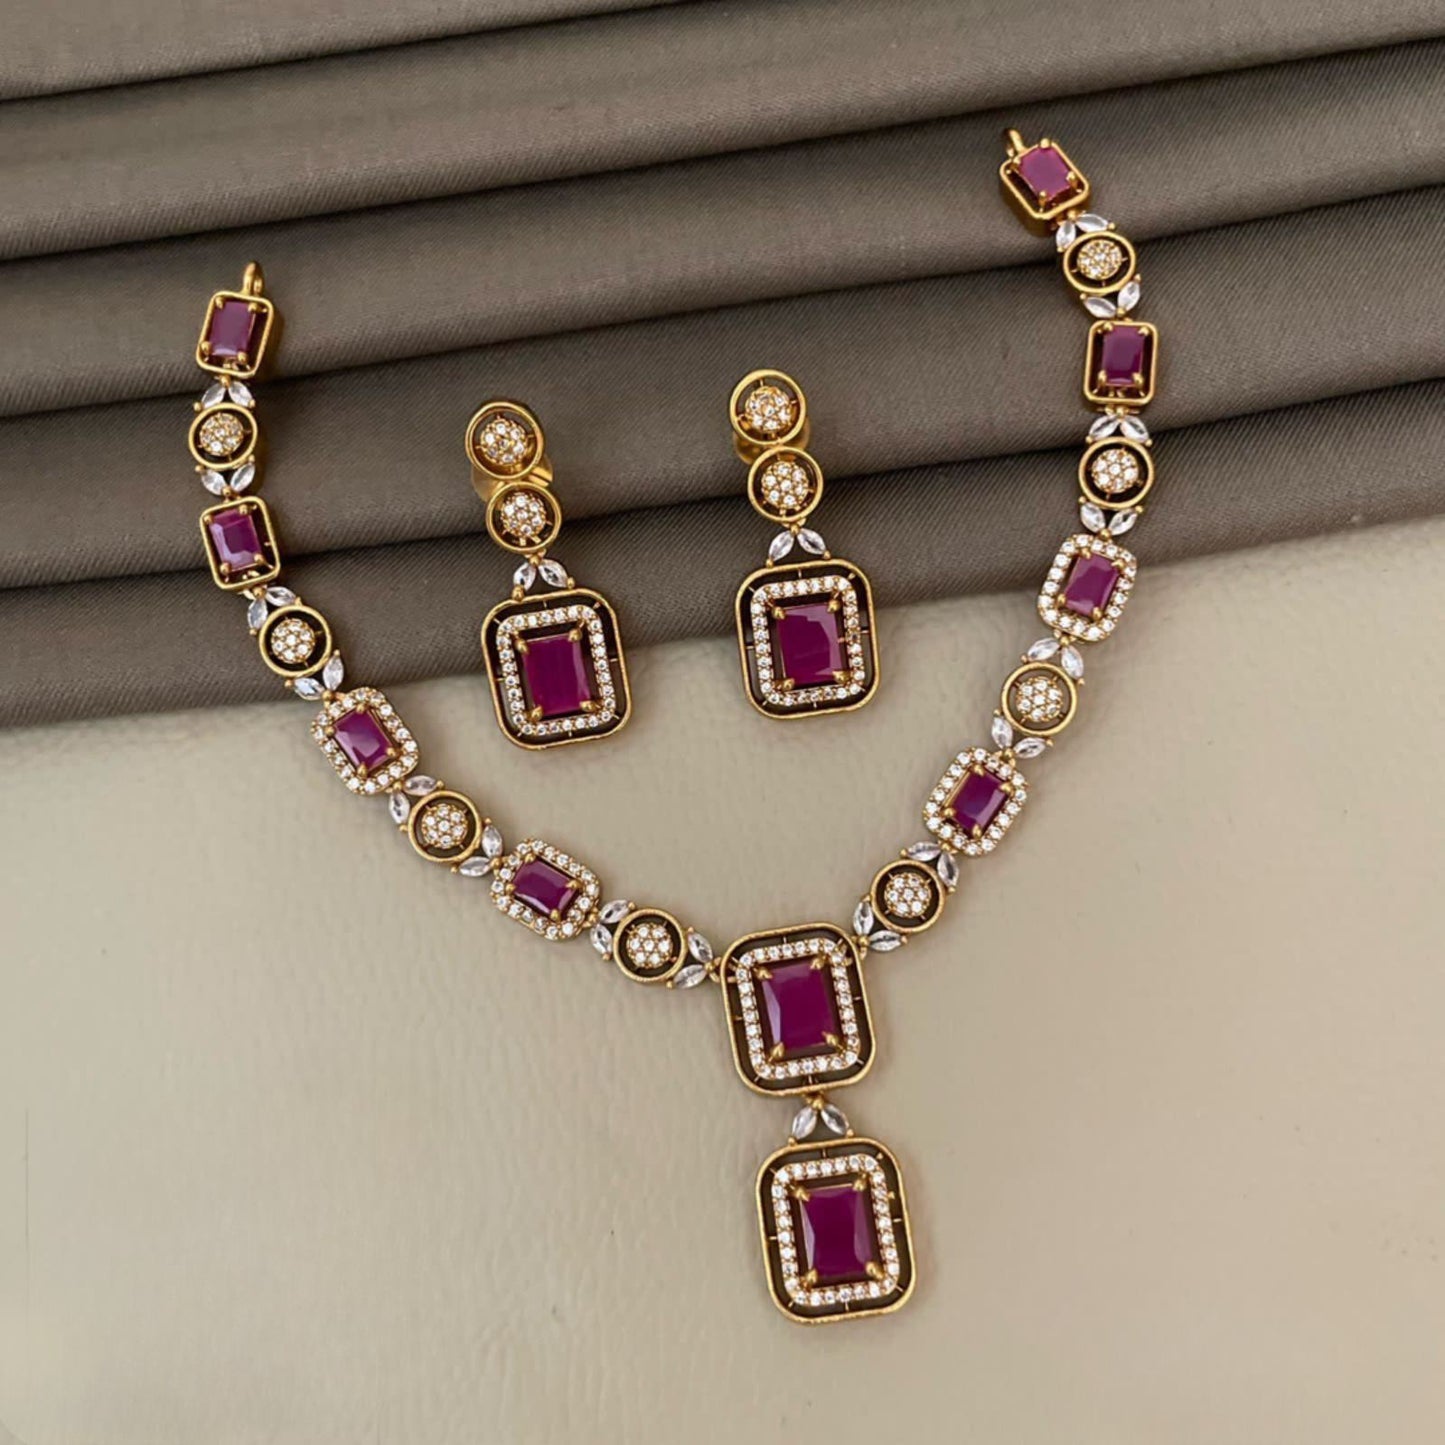 Exquisitely Designed American Diamond Stone Necklace Set with Earrings